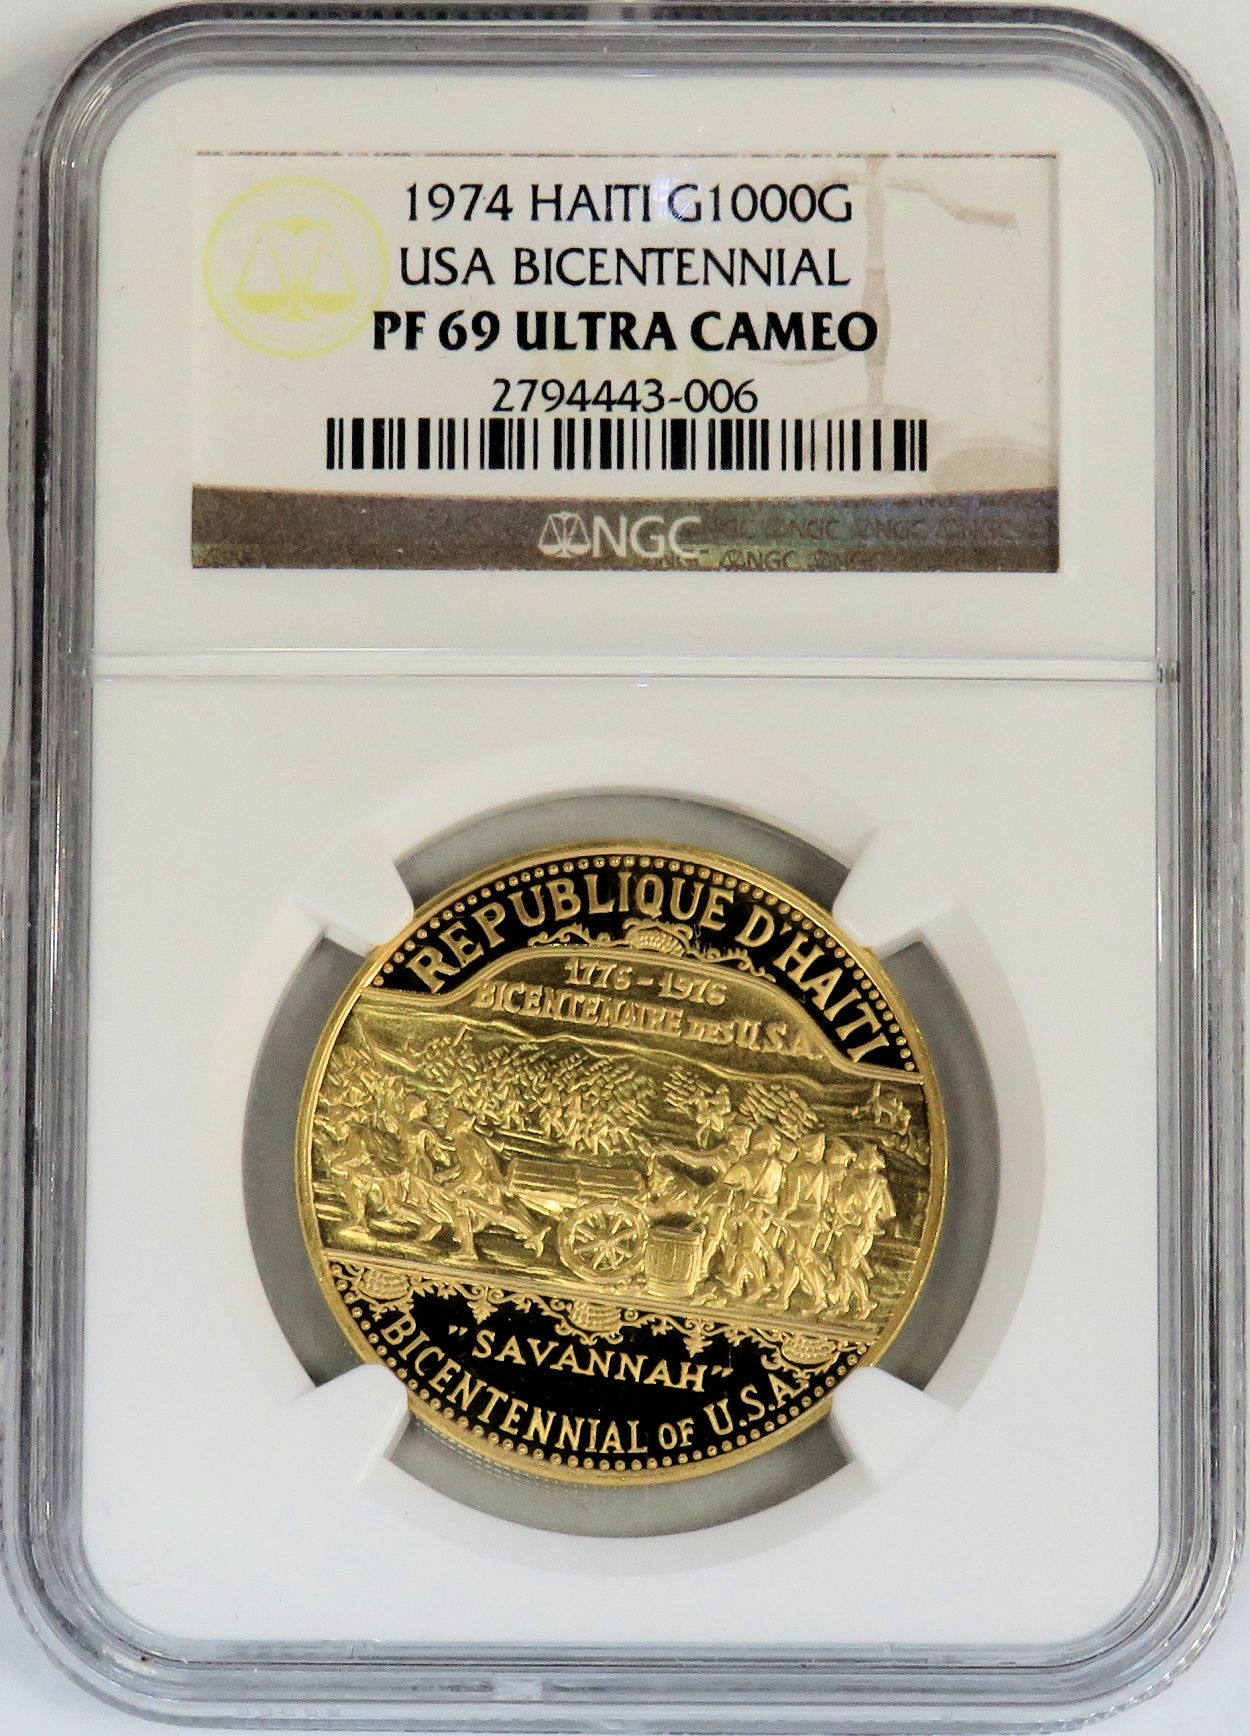 1974 GOLD HAITI 1000 GOURDES USA BICENTENNIAL NGC PROOF 69 ULTRA CAMEO ONLY 480 MINTED